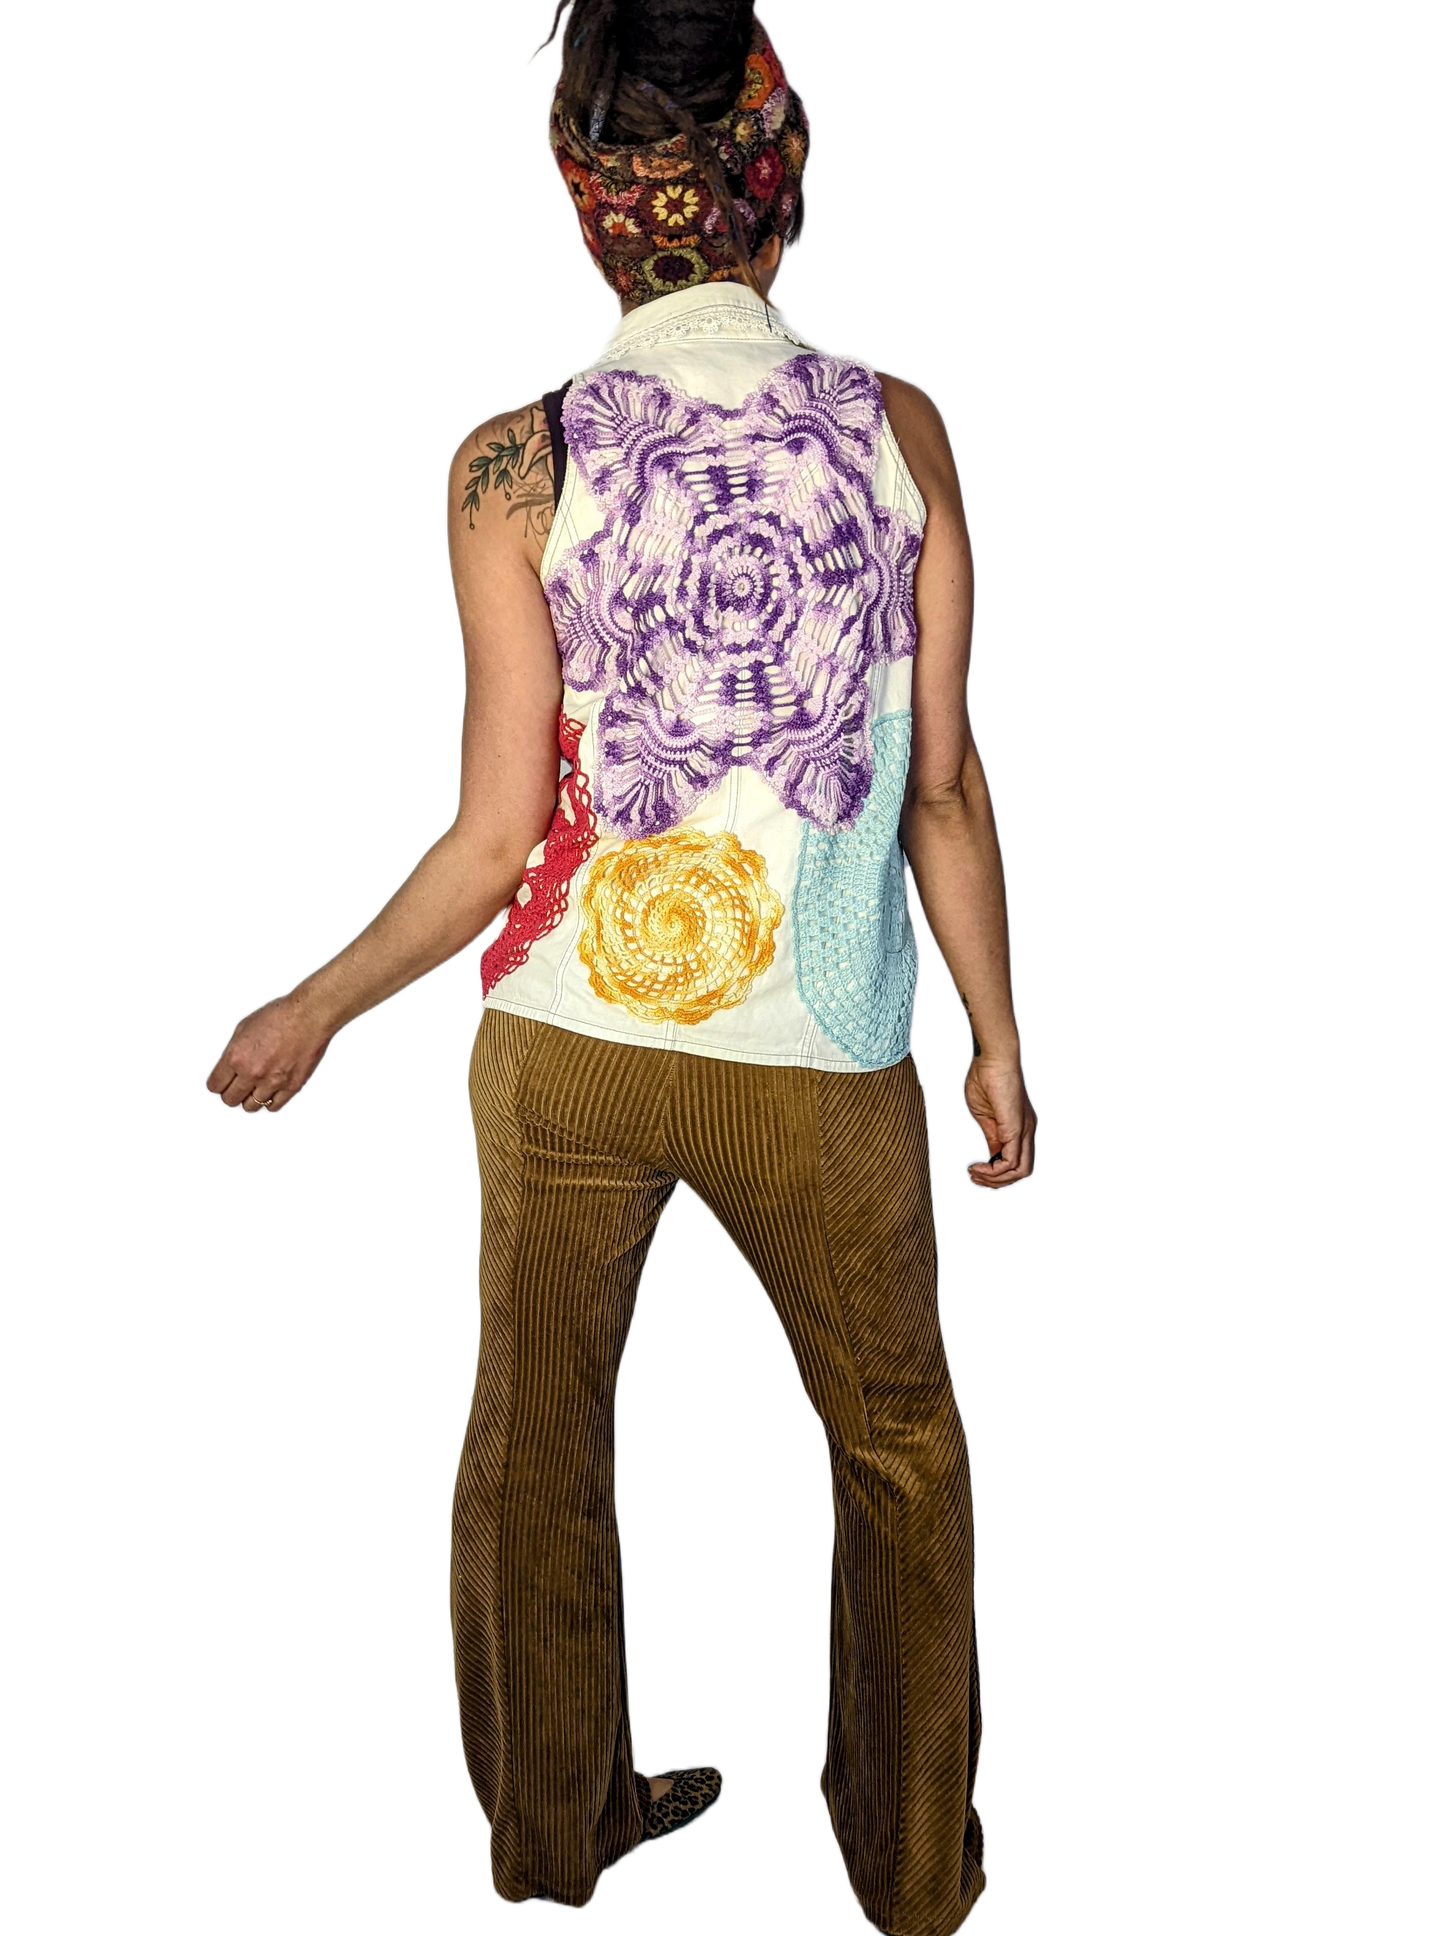 Woman is wearing cottagecore style white vest with repurposed doilies on it.